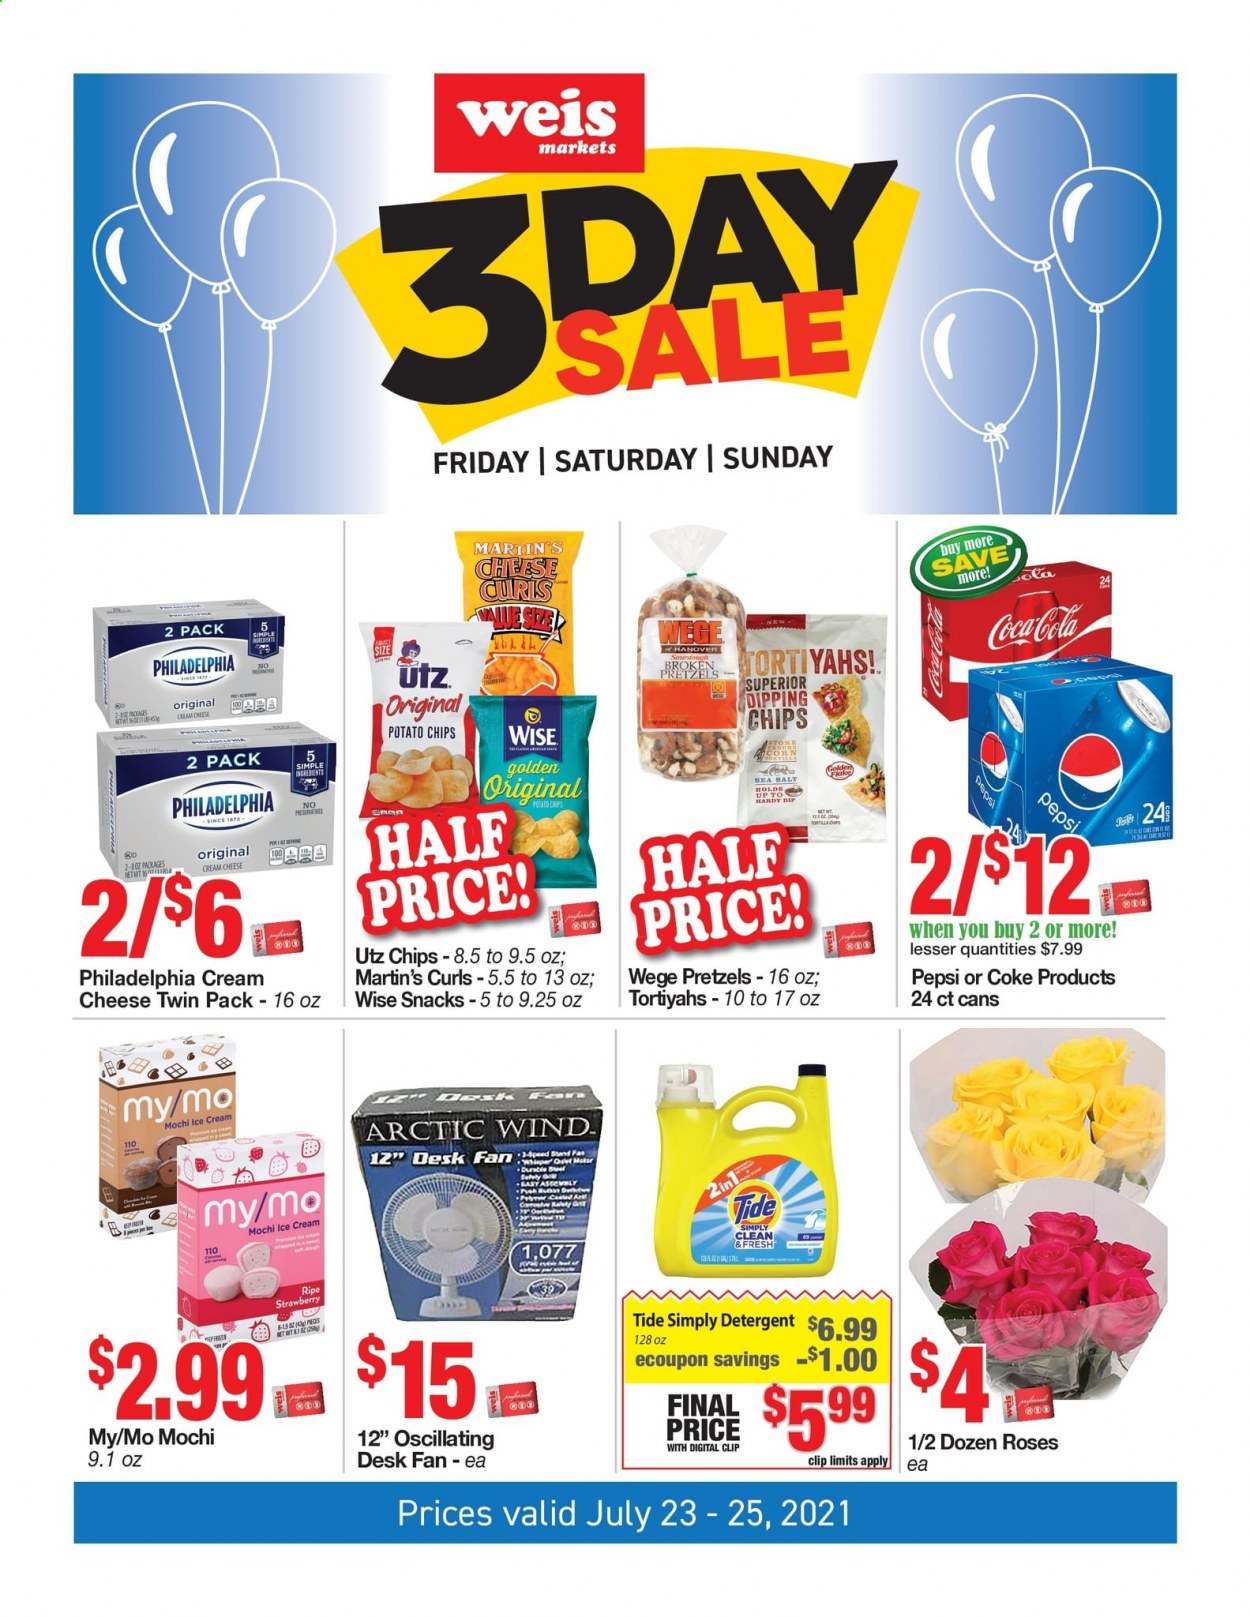 thumbnail - Weis Flyer - 07/23/2021 - 07/25/2021 - Sales products - pretzels, cream cheese, Philadelphia, cheese, dip, ice cream, Ola, snack, potato chips, chips, Coca-Cola, Pepsi, detergent, Tide, folder, rose. Page 1.